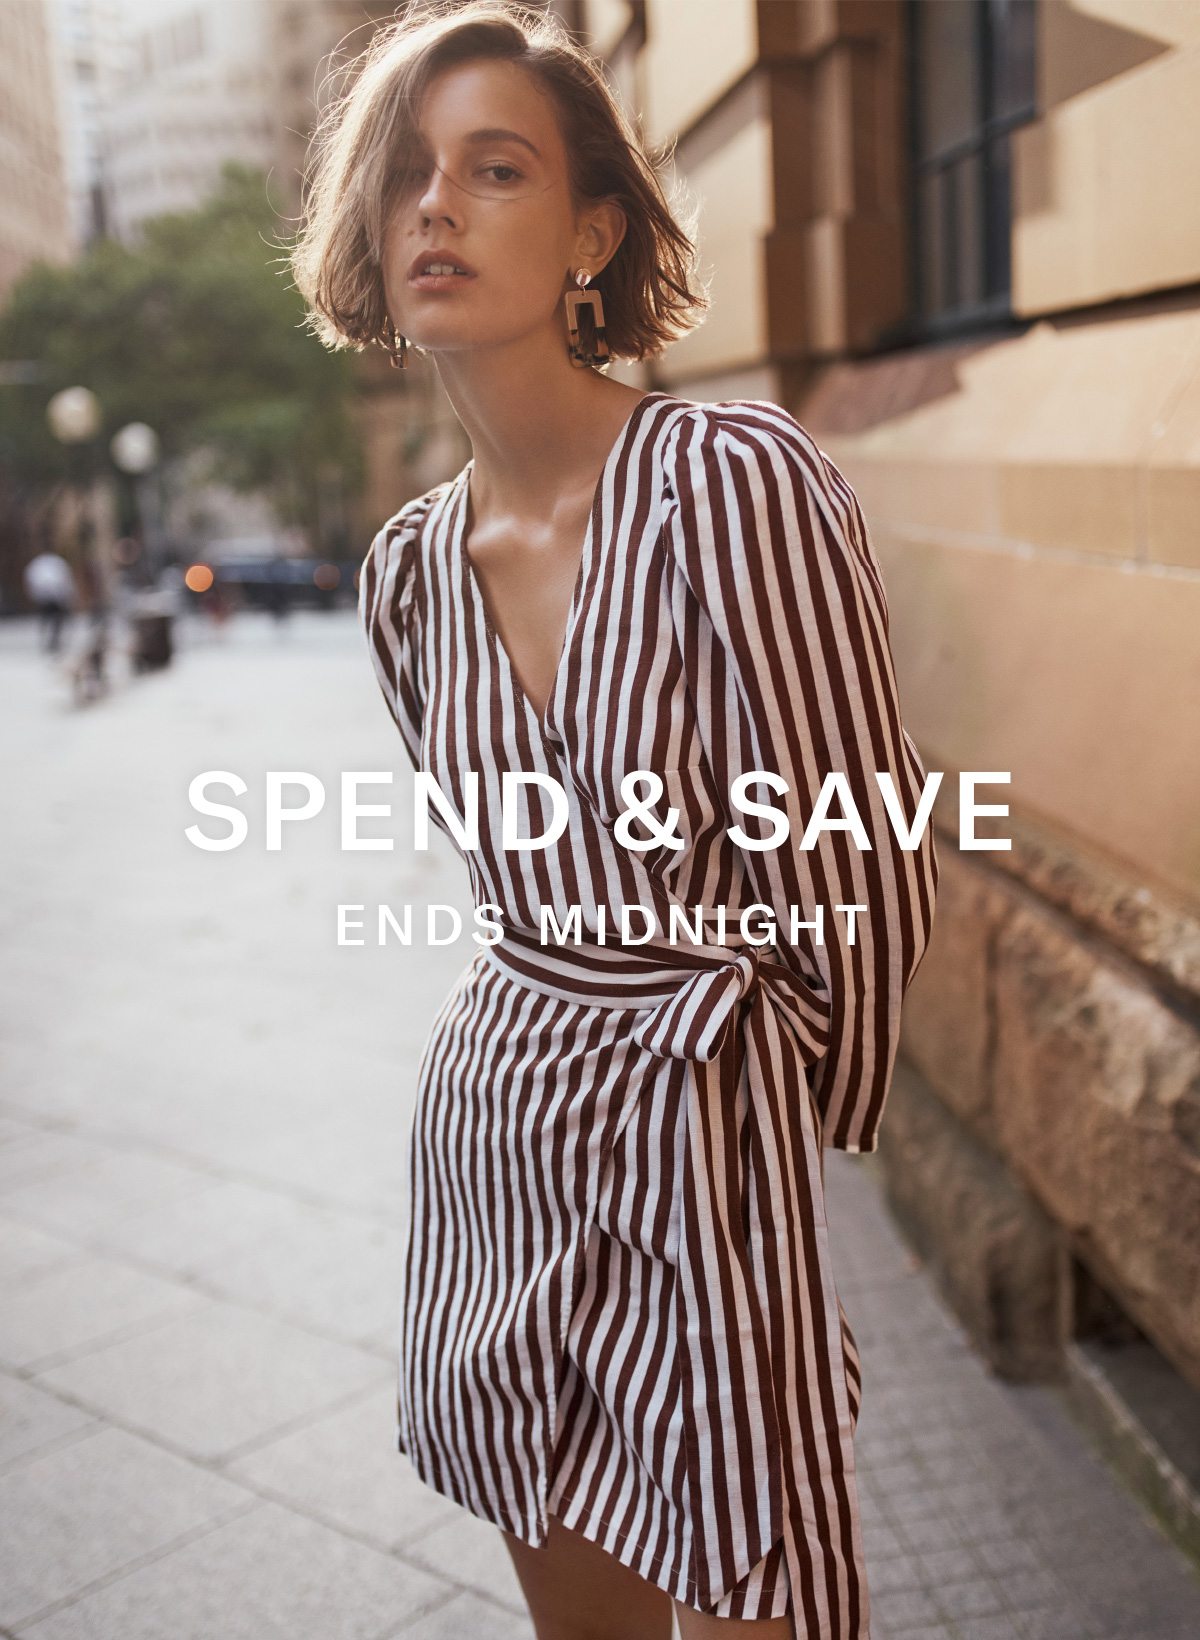 Spend & Save ends midnight